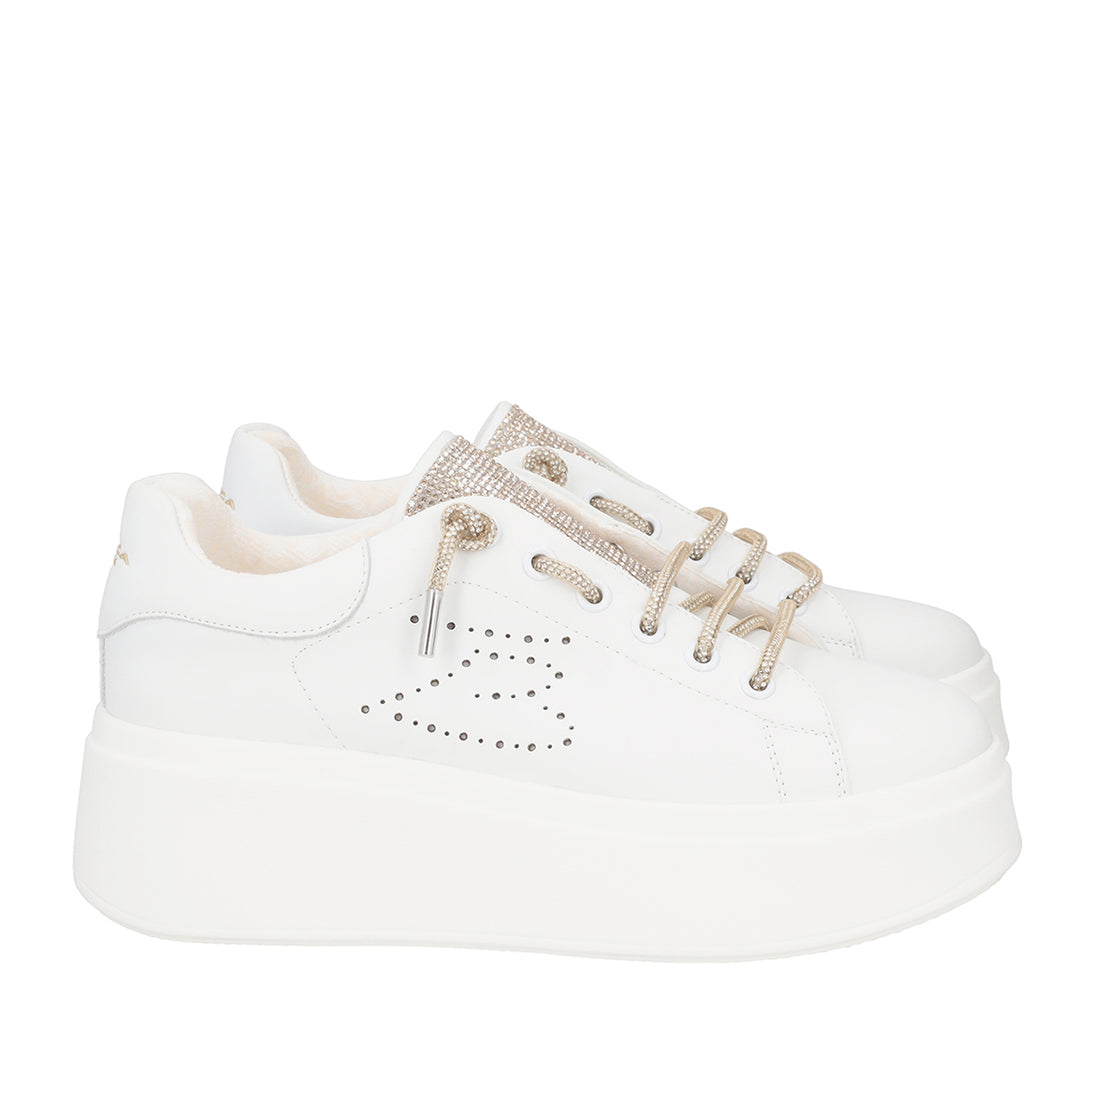 WHITE/GOLD VANITY SNEAKER IN LEATHER WITH MICRO RHINESTONES